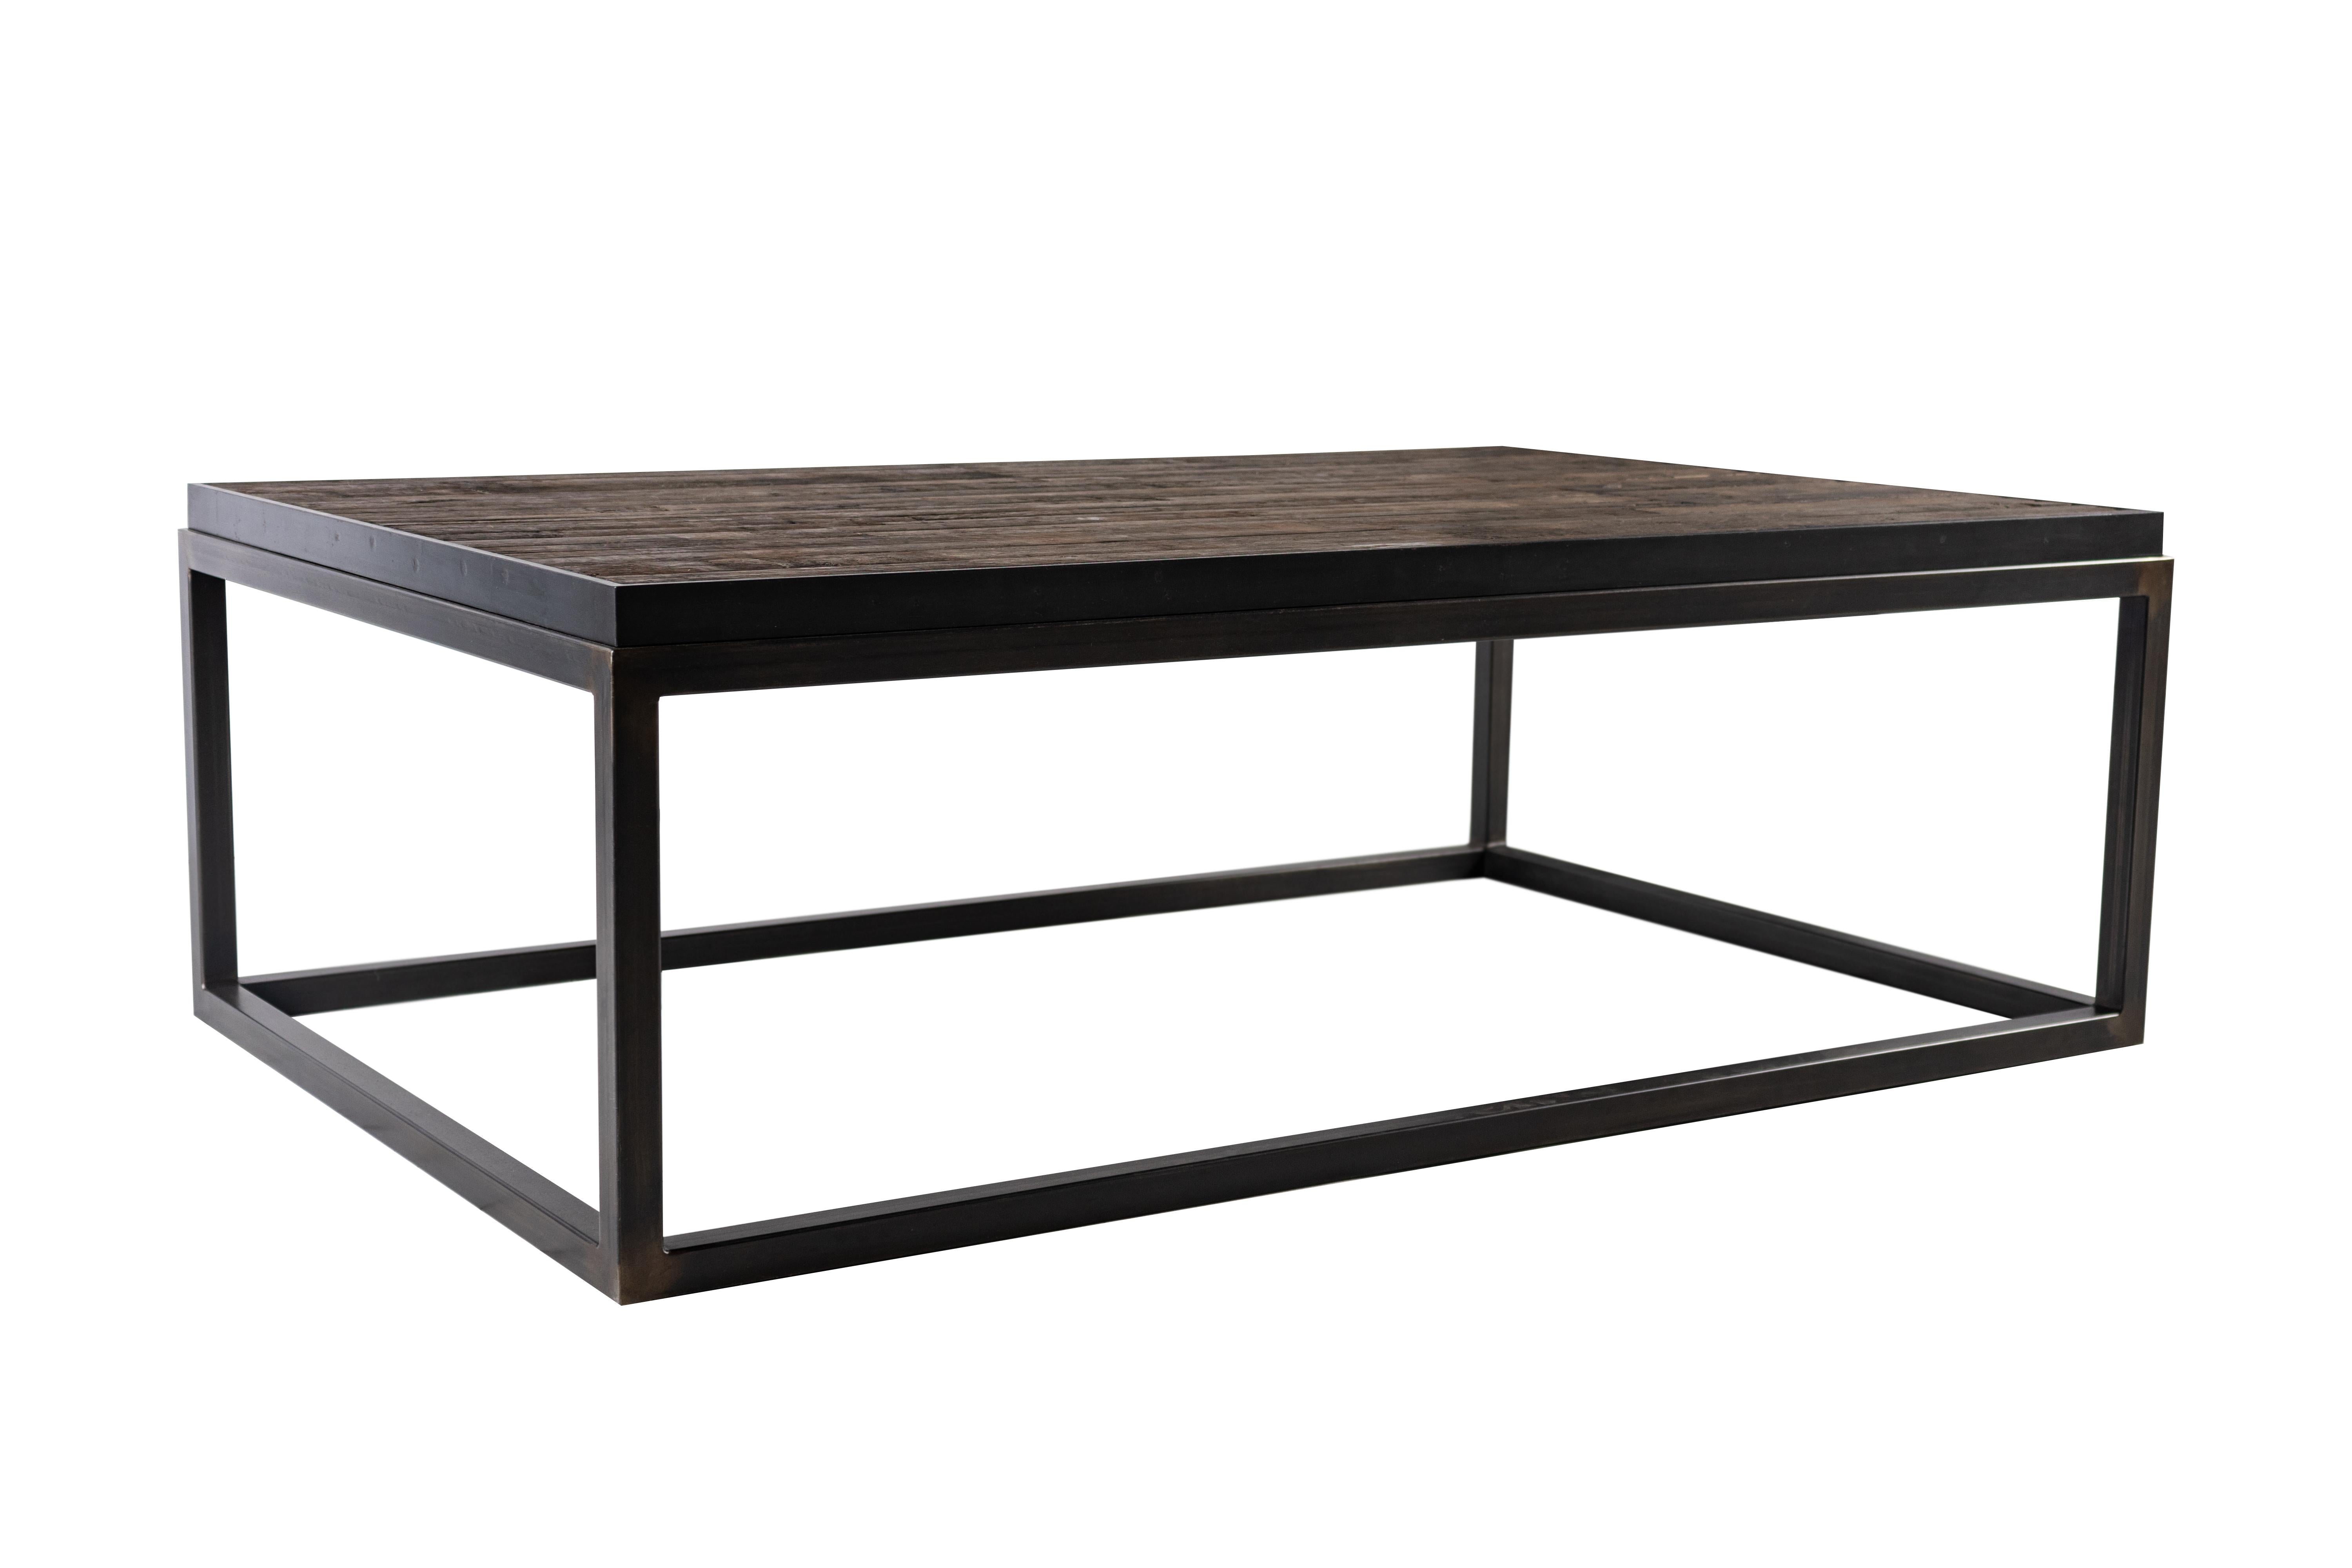 We have created a one of a kind product that will be the centrepiece of any living space. This design was entirely handmade, and showcases the beauty of creating something from reclaimed oak and ebony patina steel base materials. In a world of